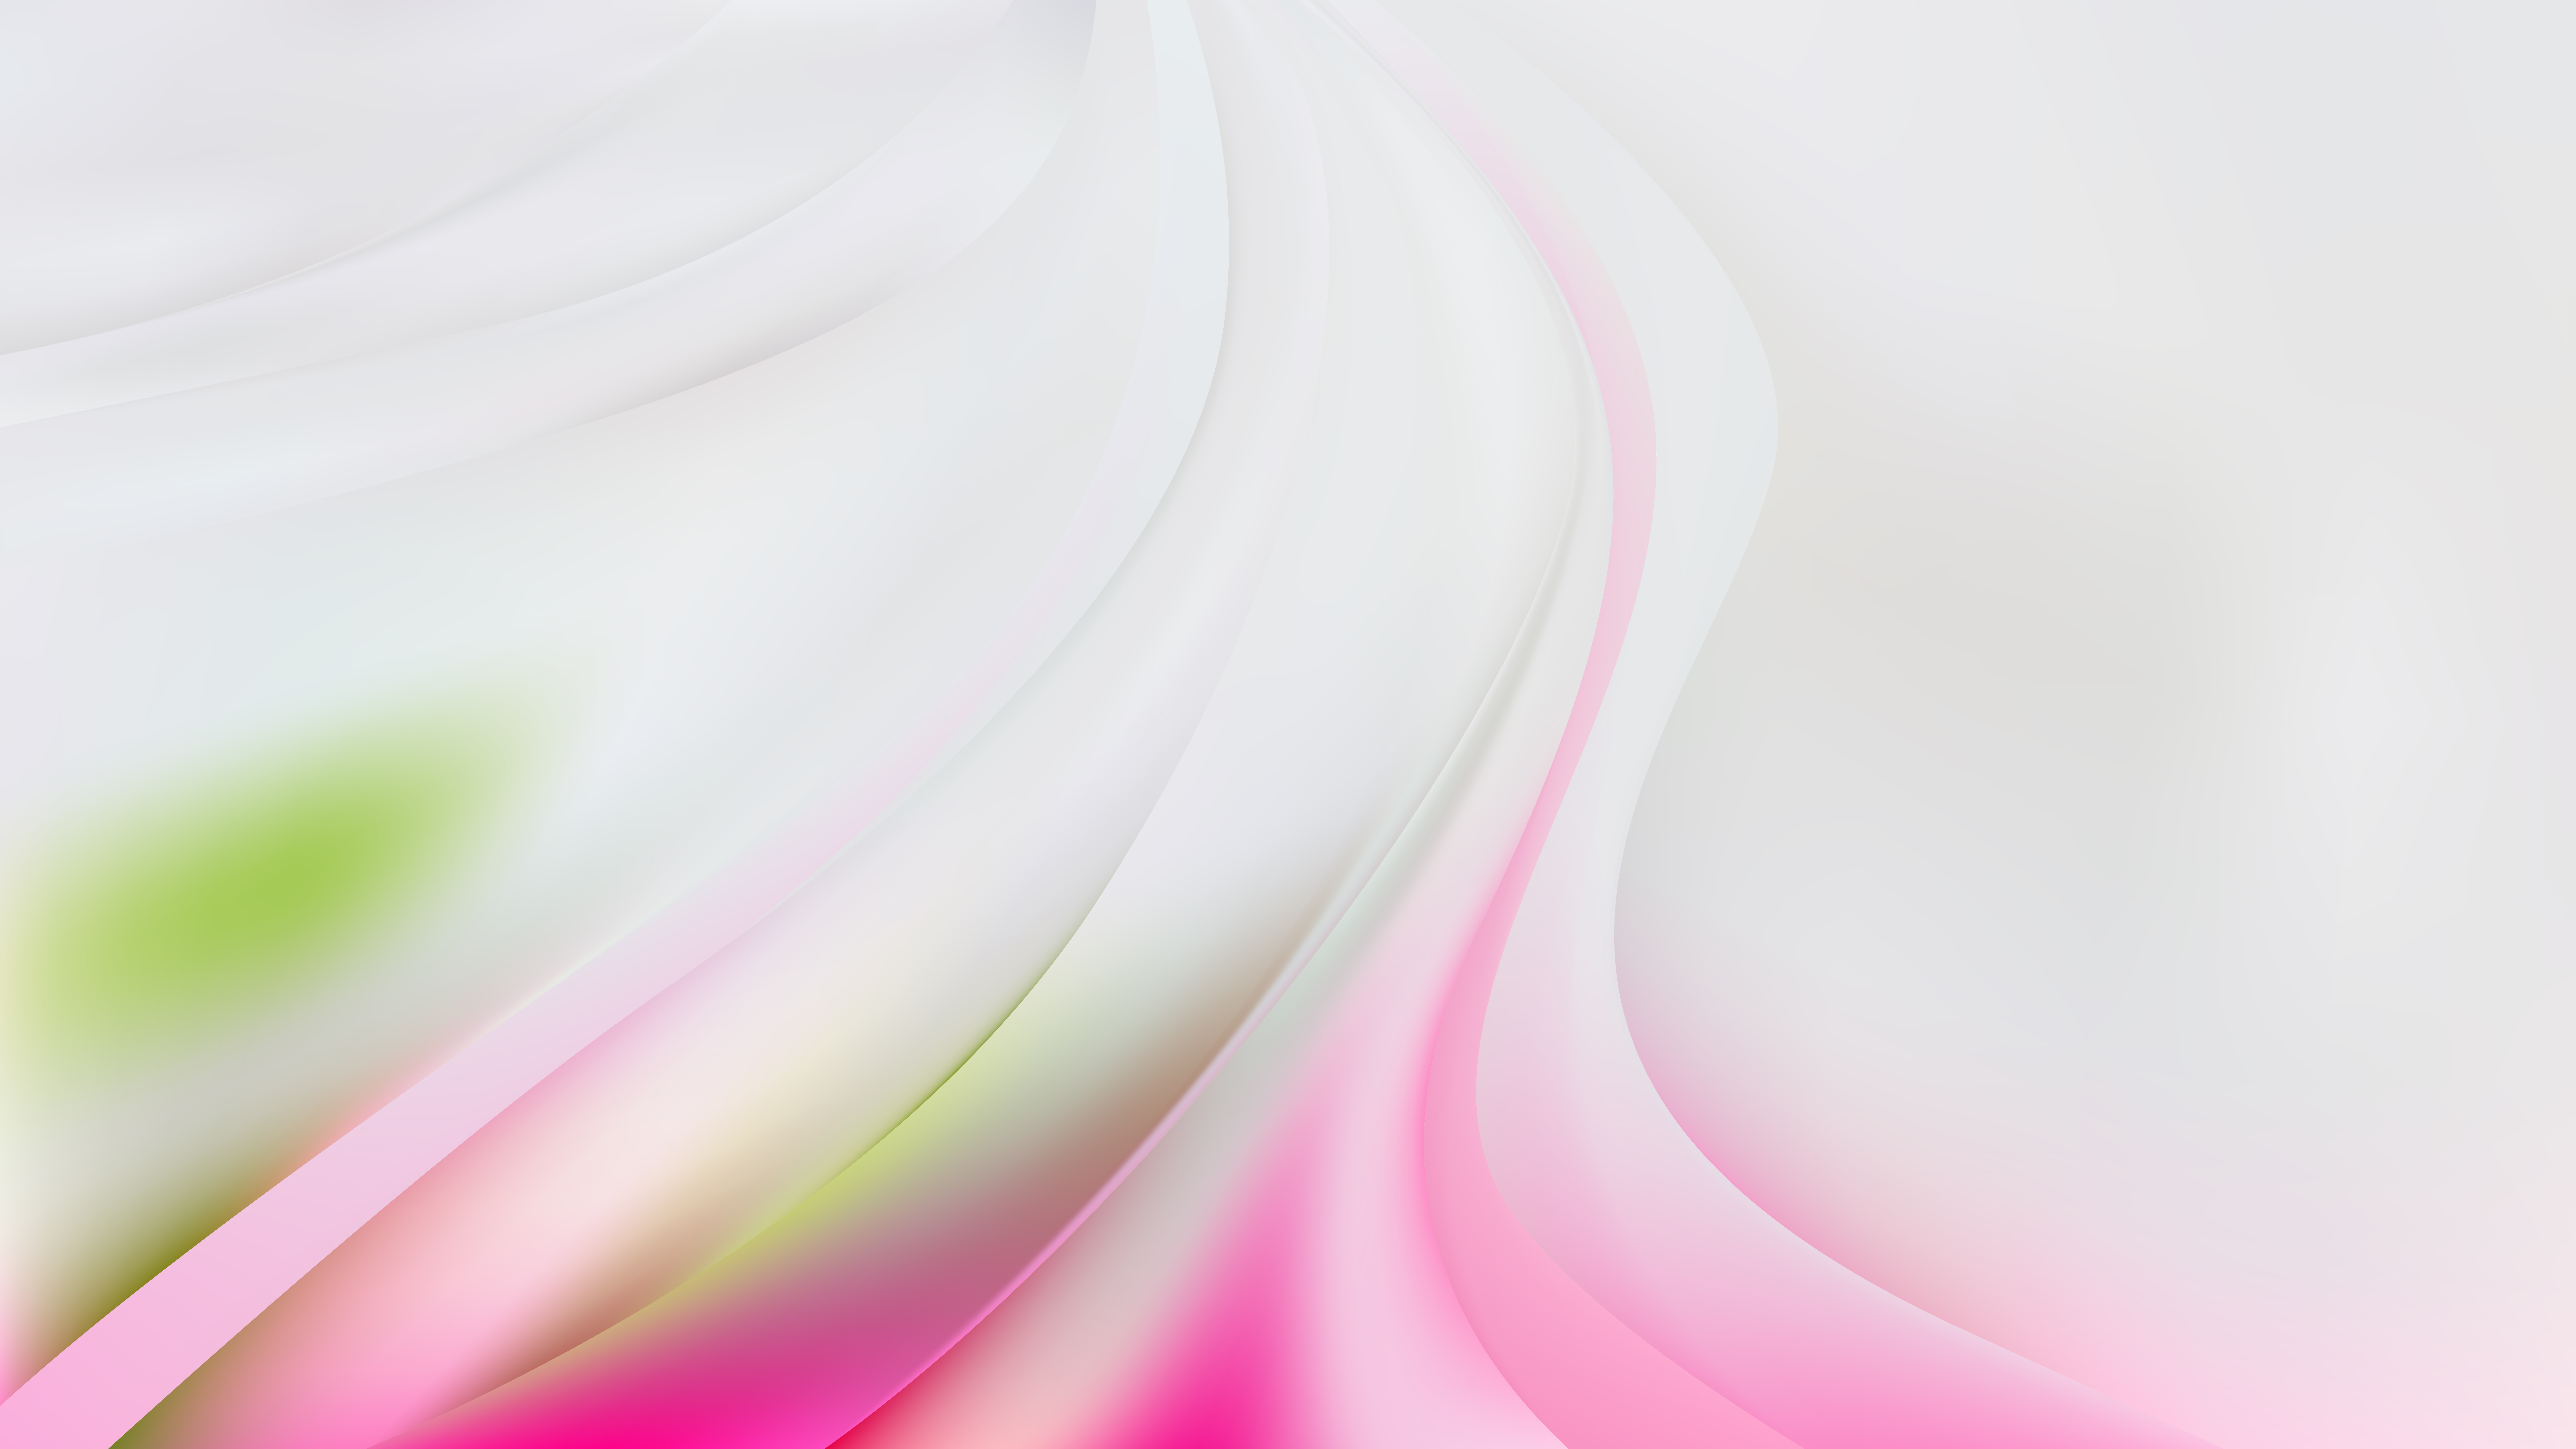 Free Abstract Pink Green and White Wave Background Vector Illustration